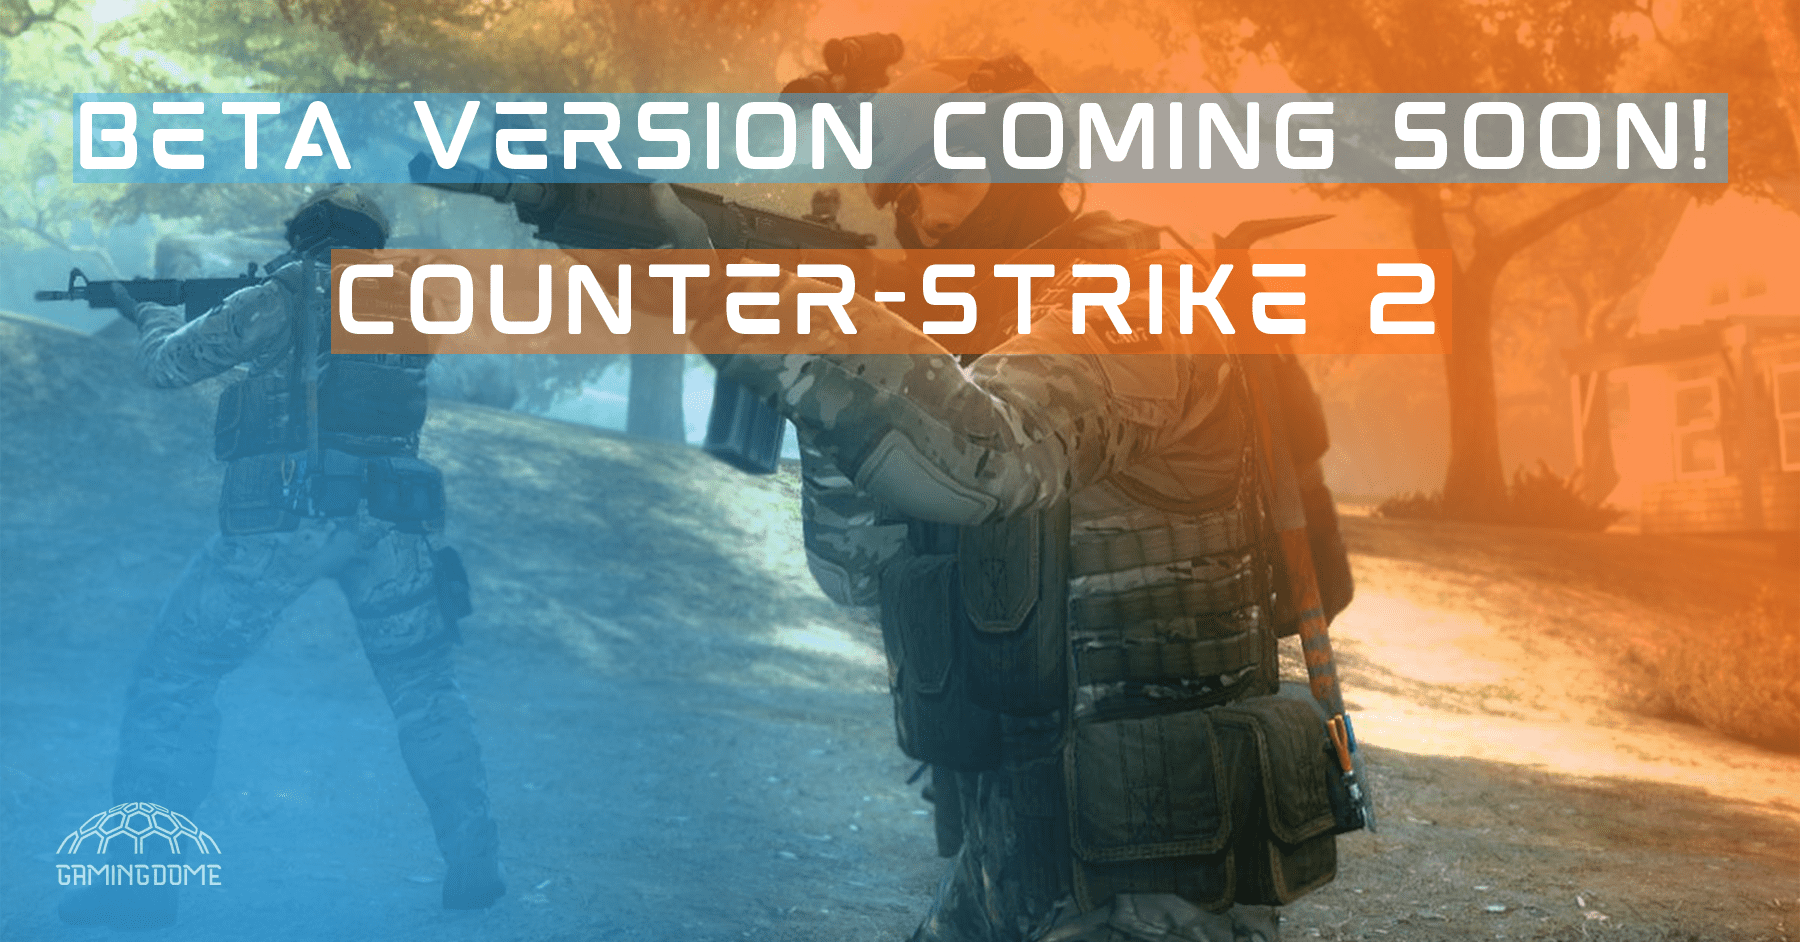 SURPRISE! COUNTER-STRIKE 2 GAME ANNOUNCED, BETA VERSION COMING SOON!